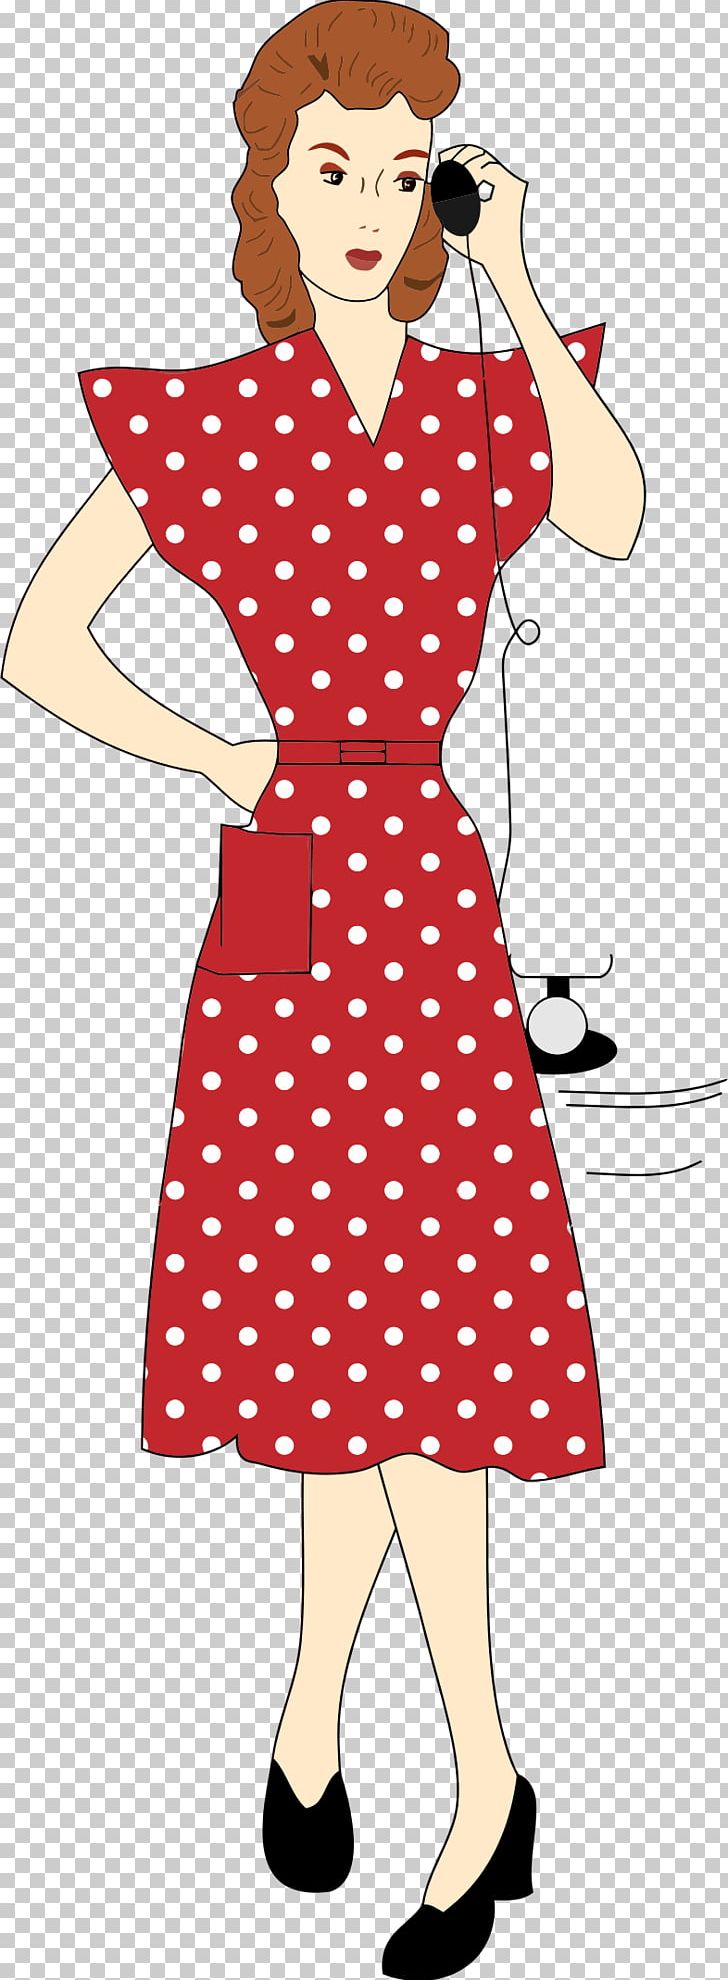 1940s Dress Woman PNG, Clipart, 1940s, Artwork, Clothing, Costume, Costume Design Free PNG Download